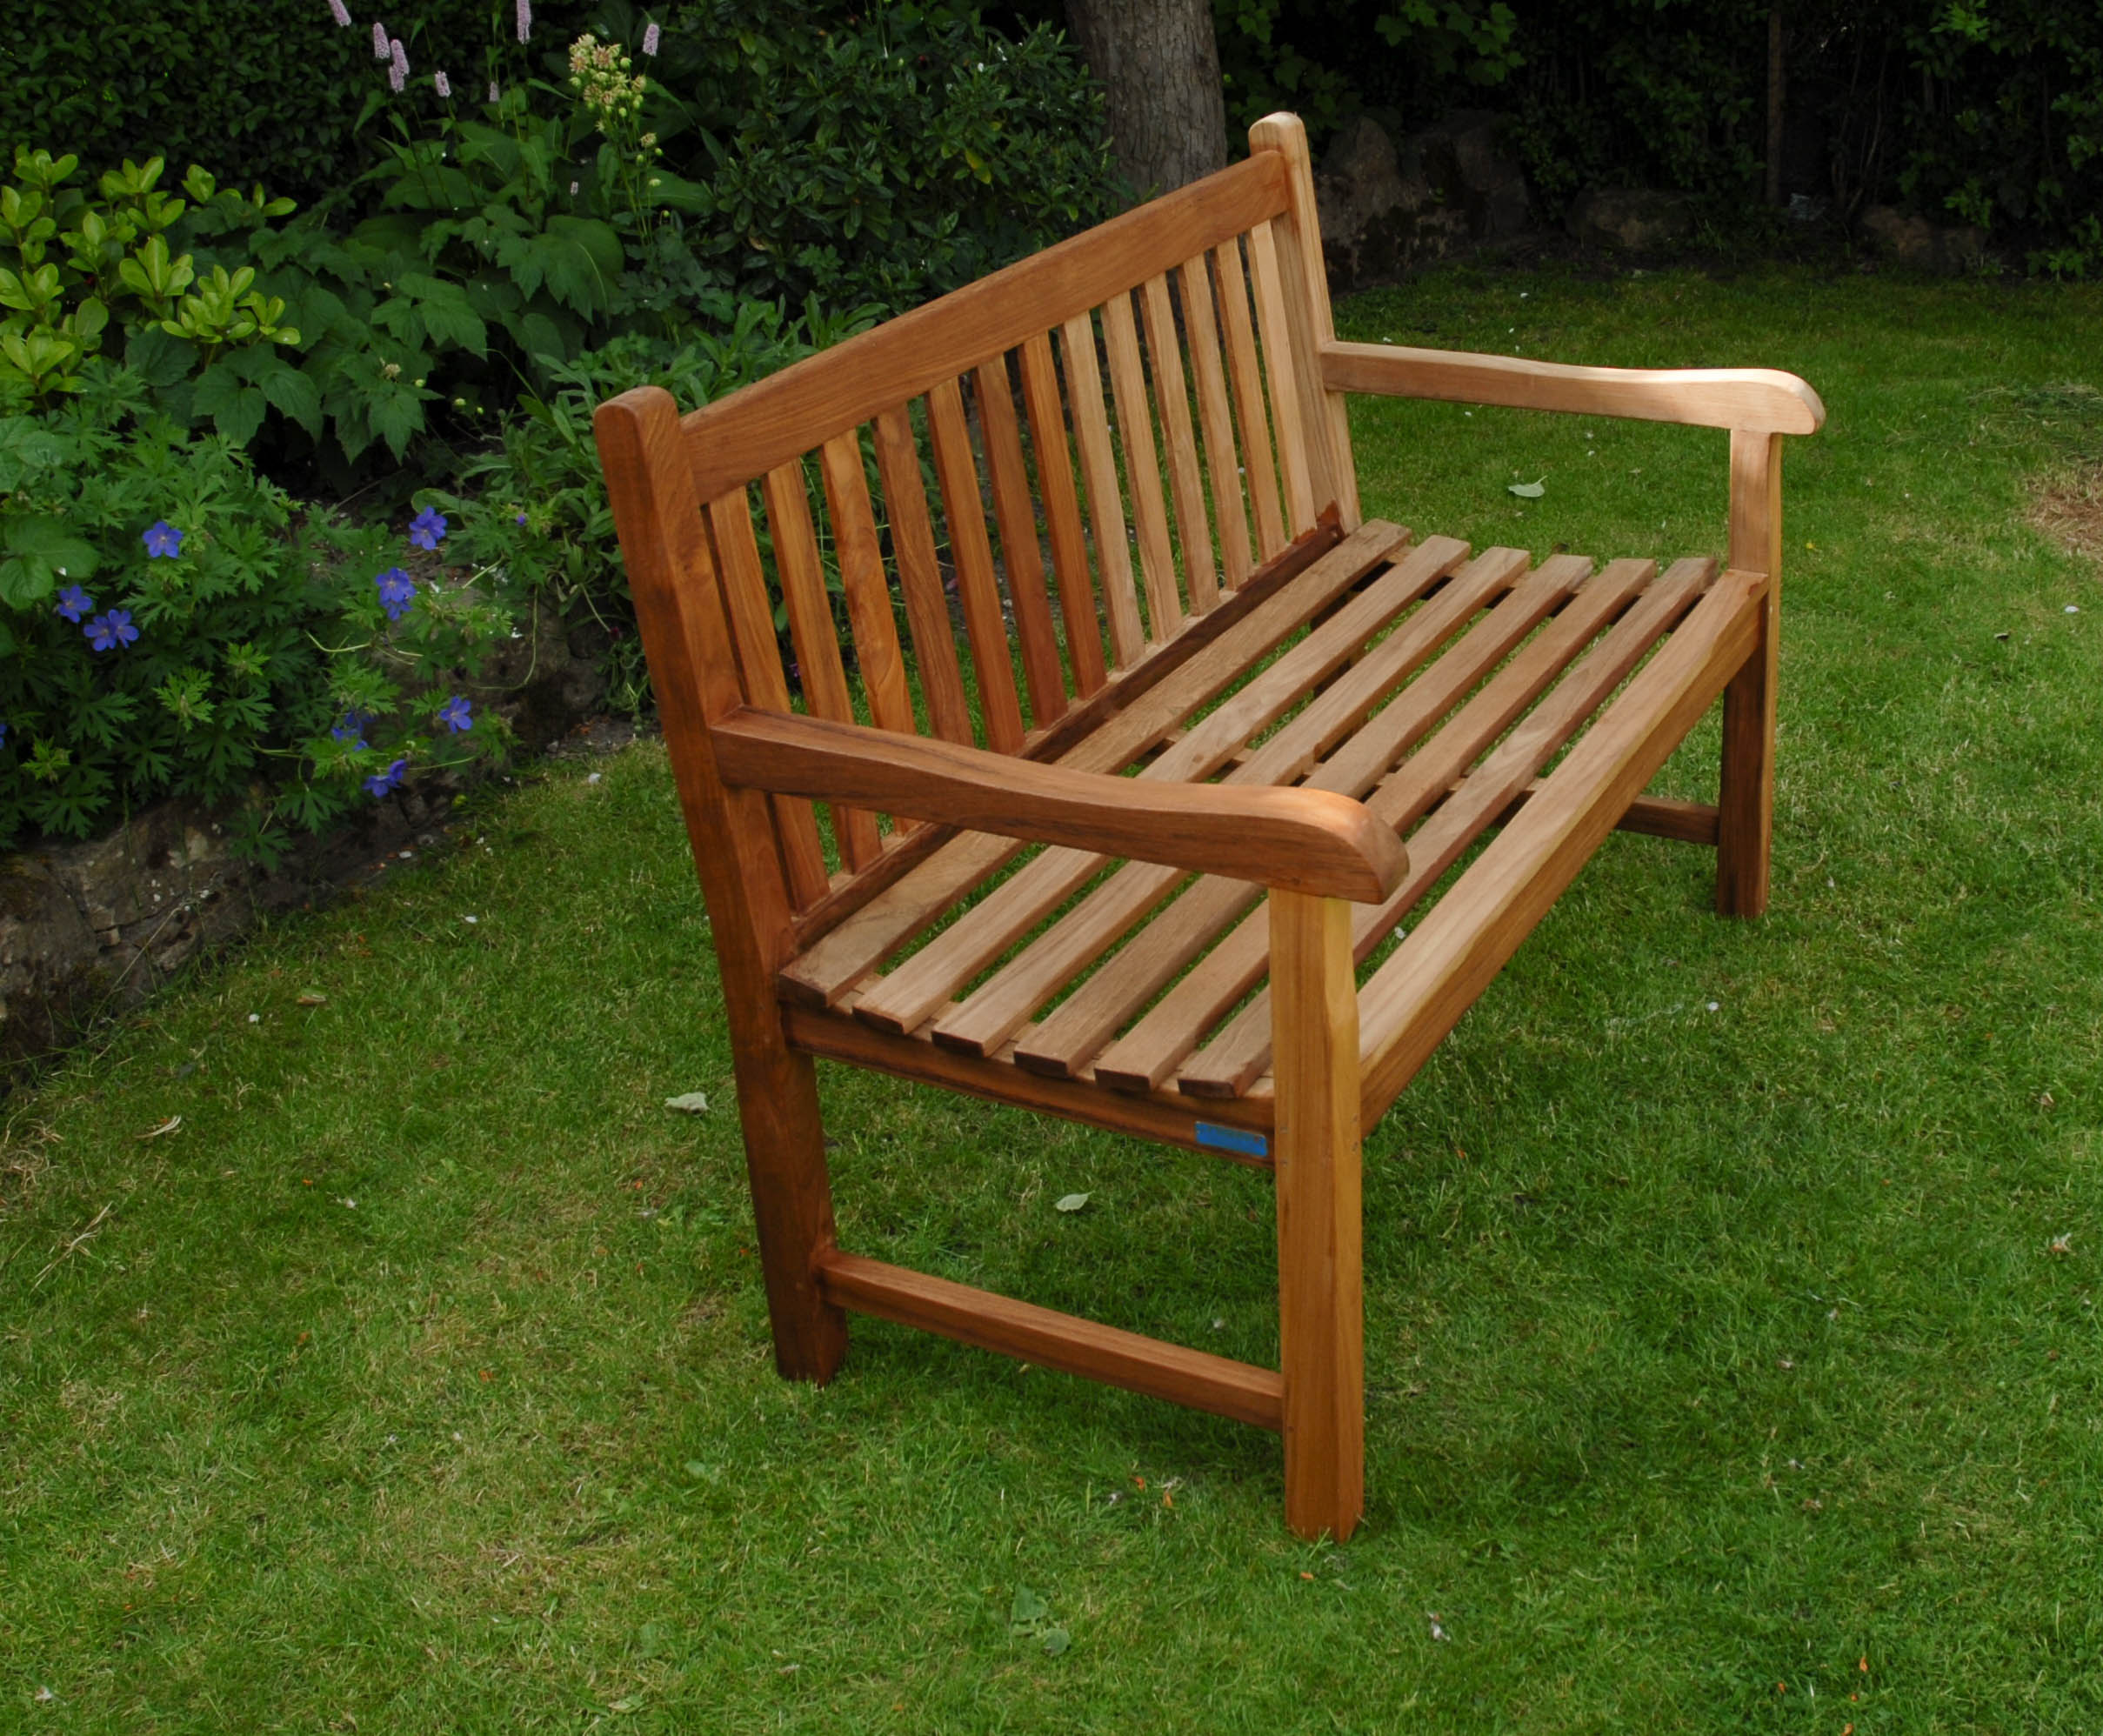 Teak Oil - The best oil for garden furniture and outdoor wood